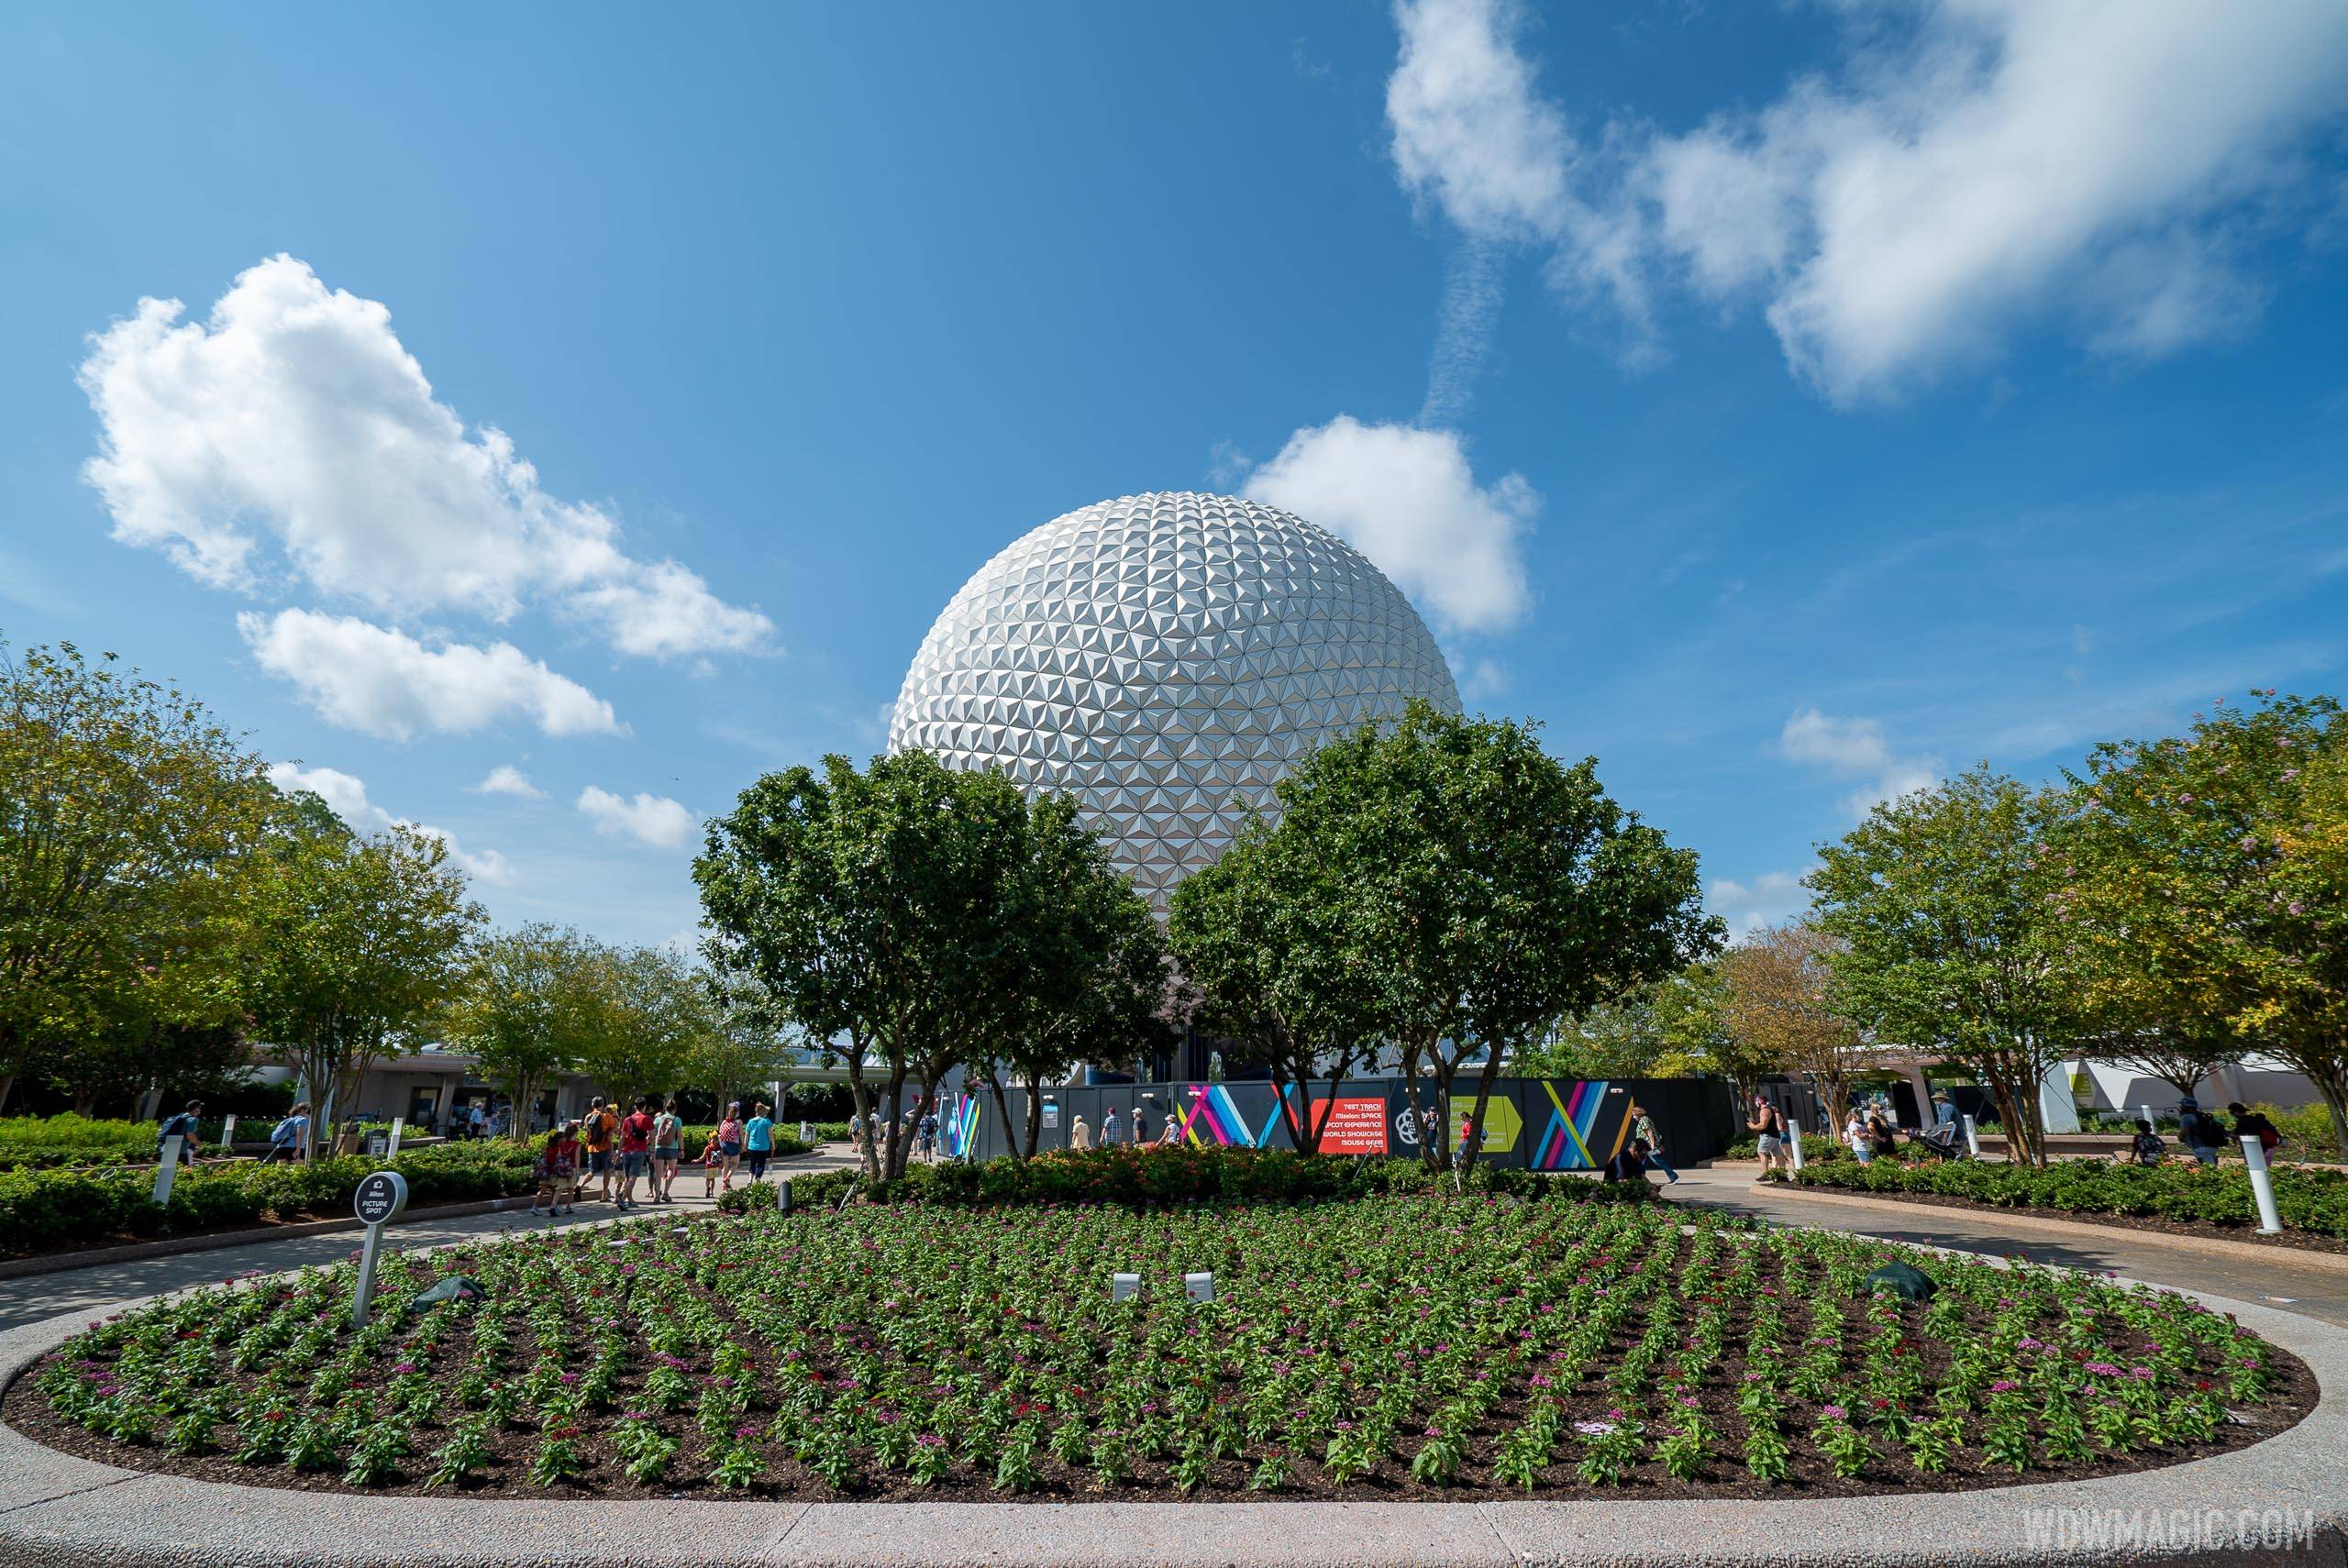 PHOTOS - More of the EPCOT main entrance area now open with a much greener look